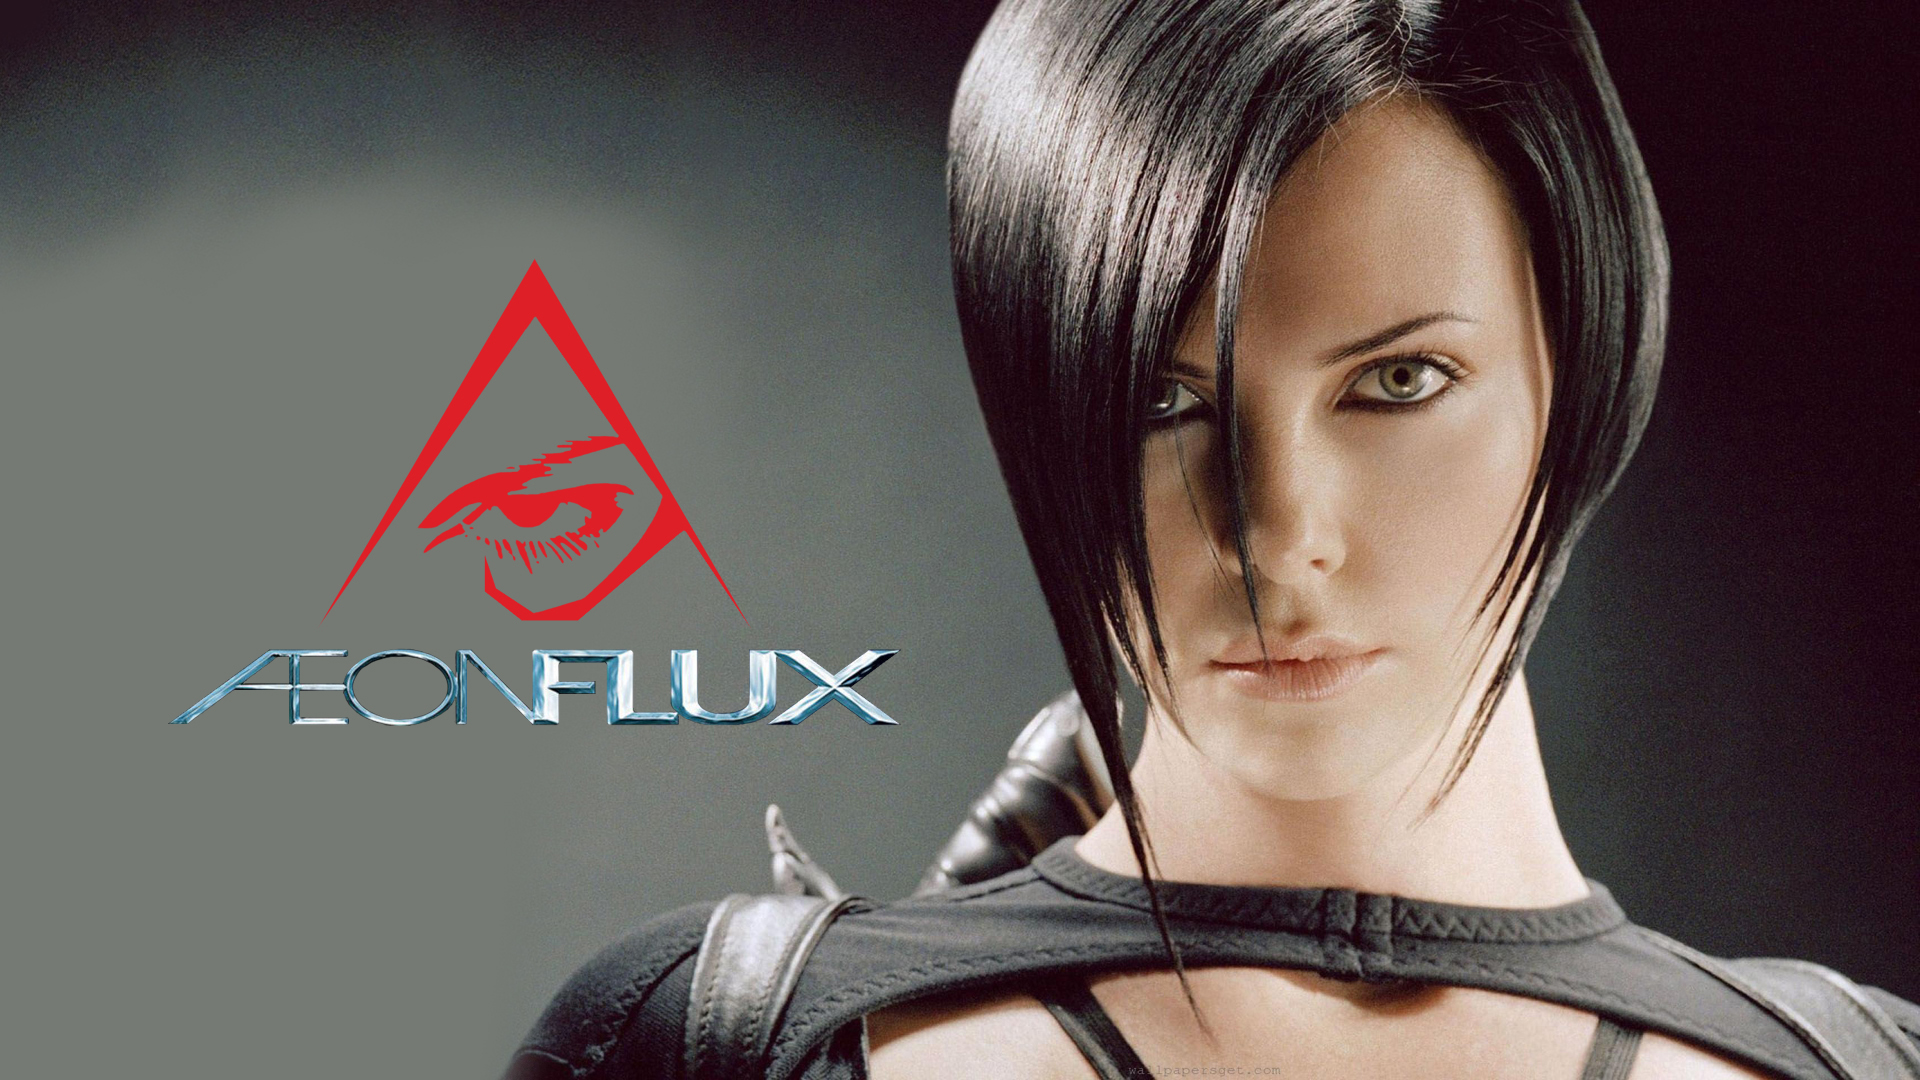 People 1920x1080 Aeon Flux Charlize Theron actress South African South African women face women looking at viewer simple background logo